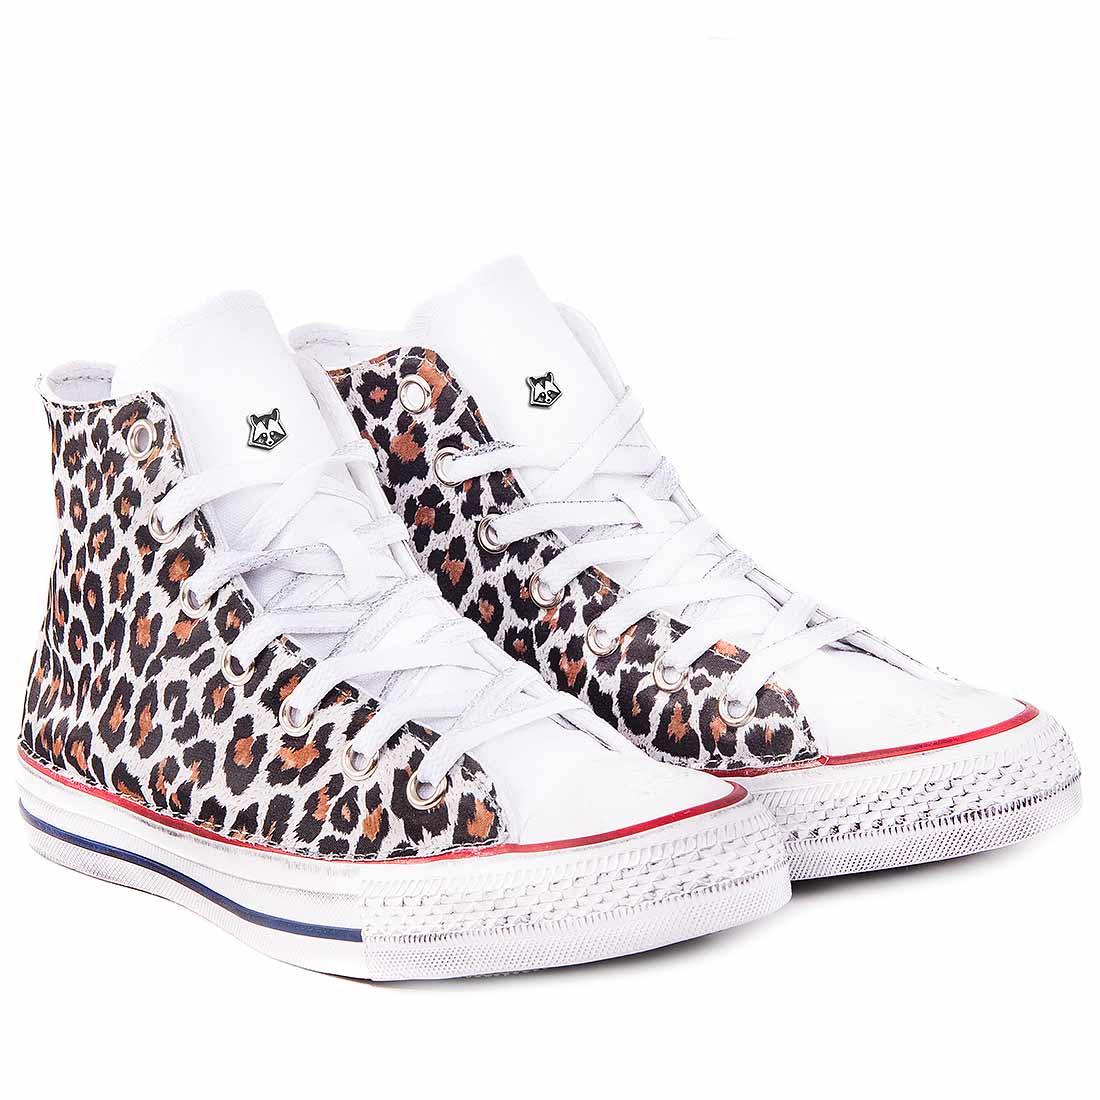 Converse-Alte-All-Star-personalizzate-leopardate-Animalier-Racoon-LAB